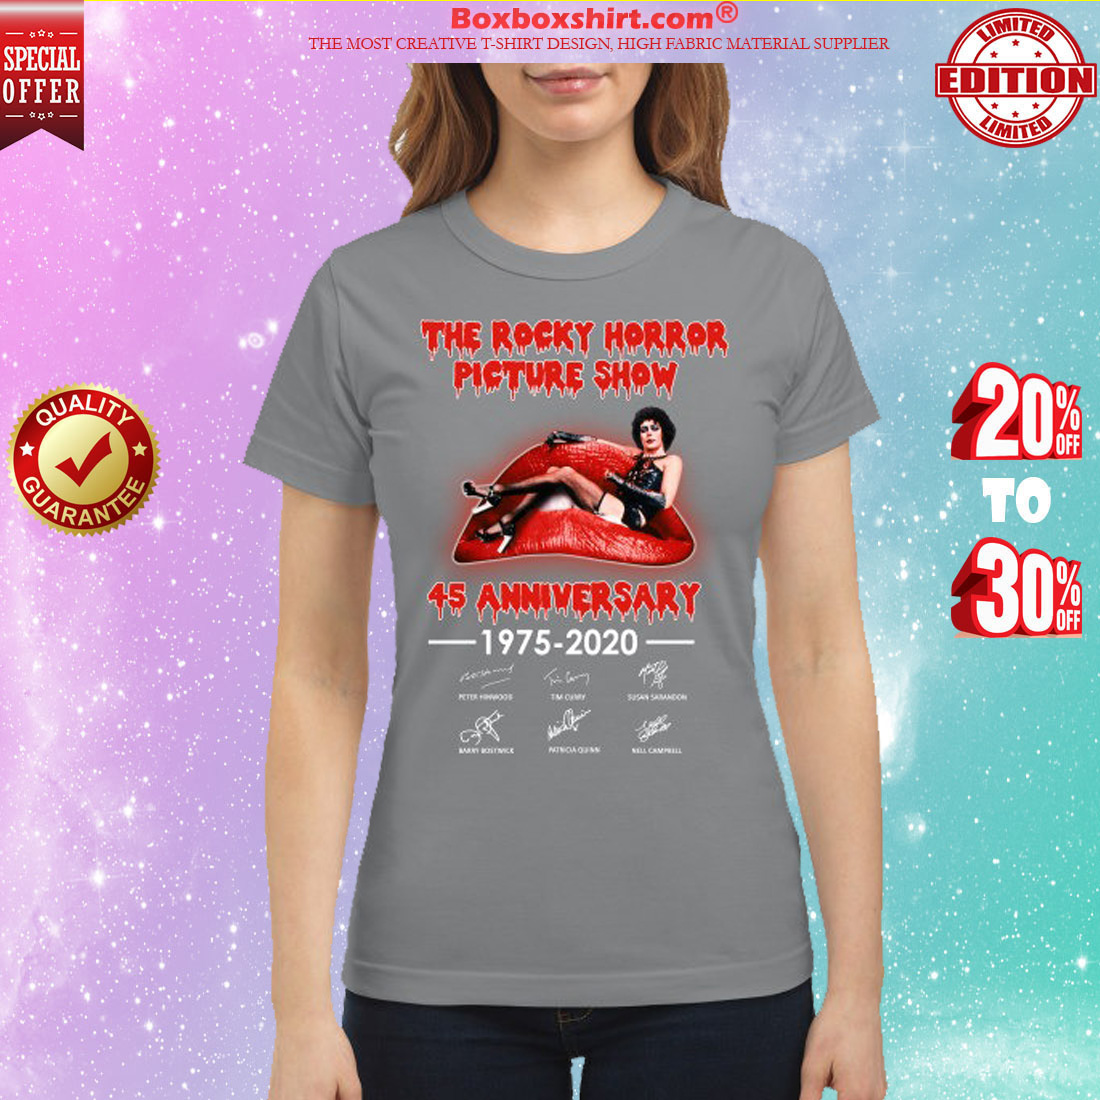 The Rocky horror picture show 45 anniversary classic shirt